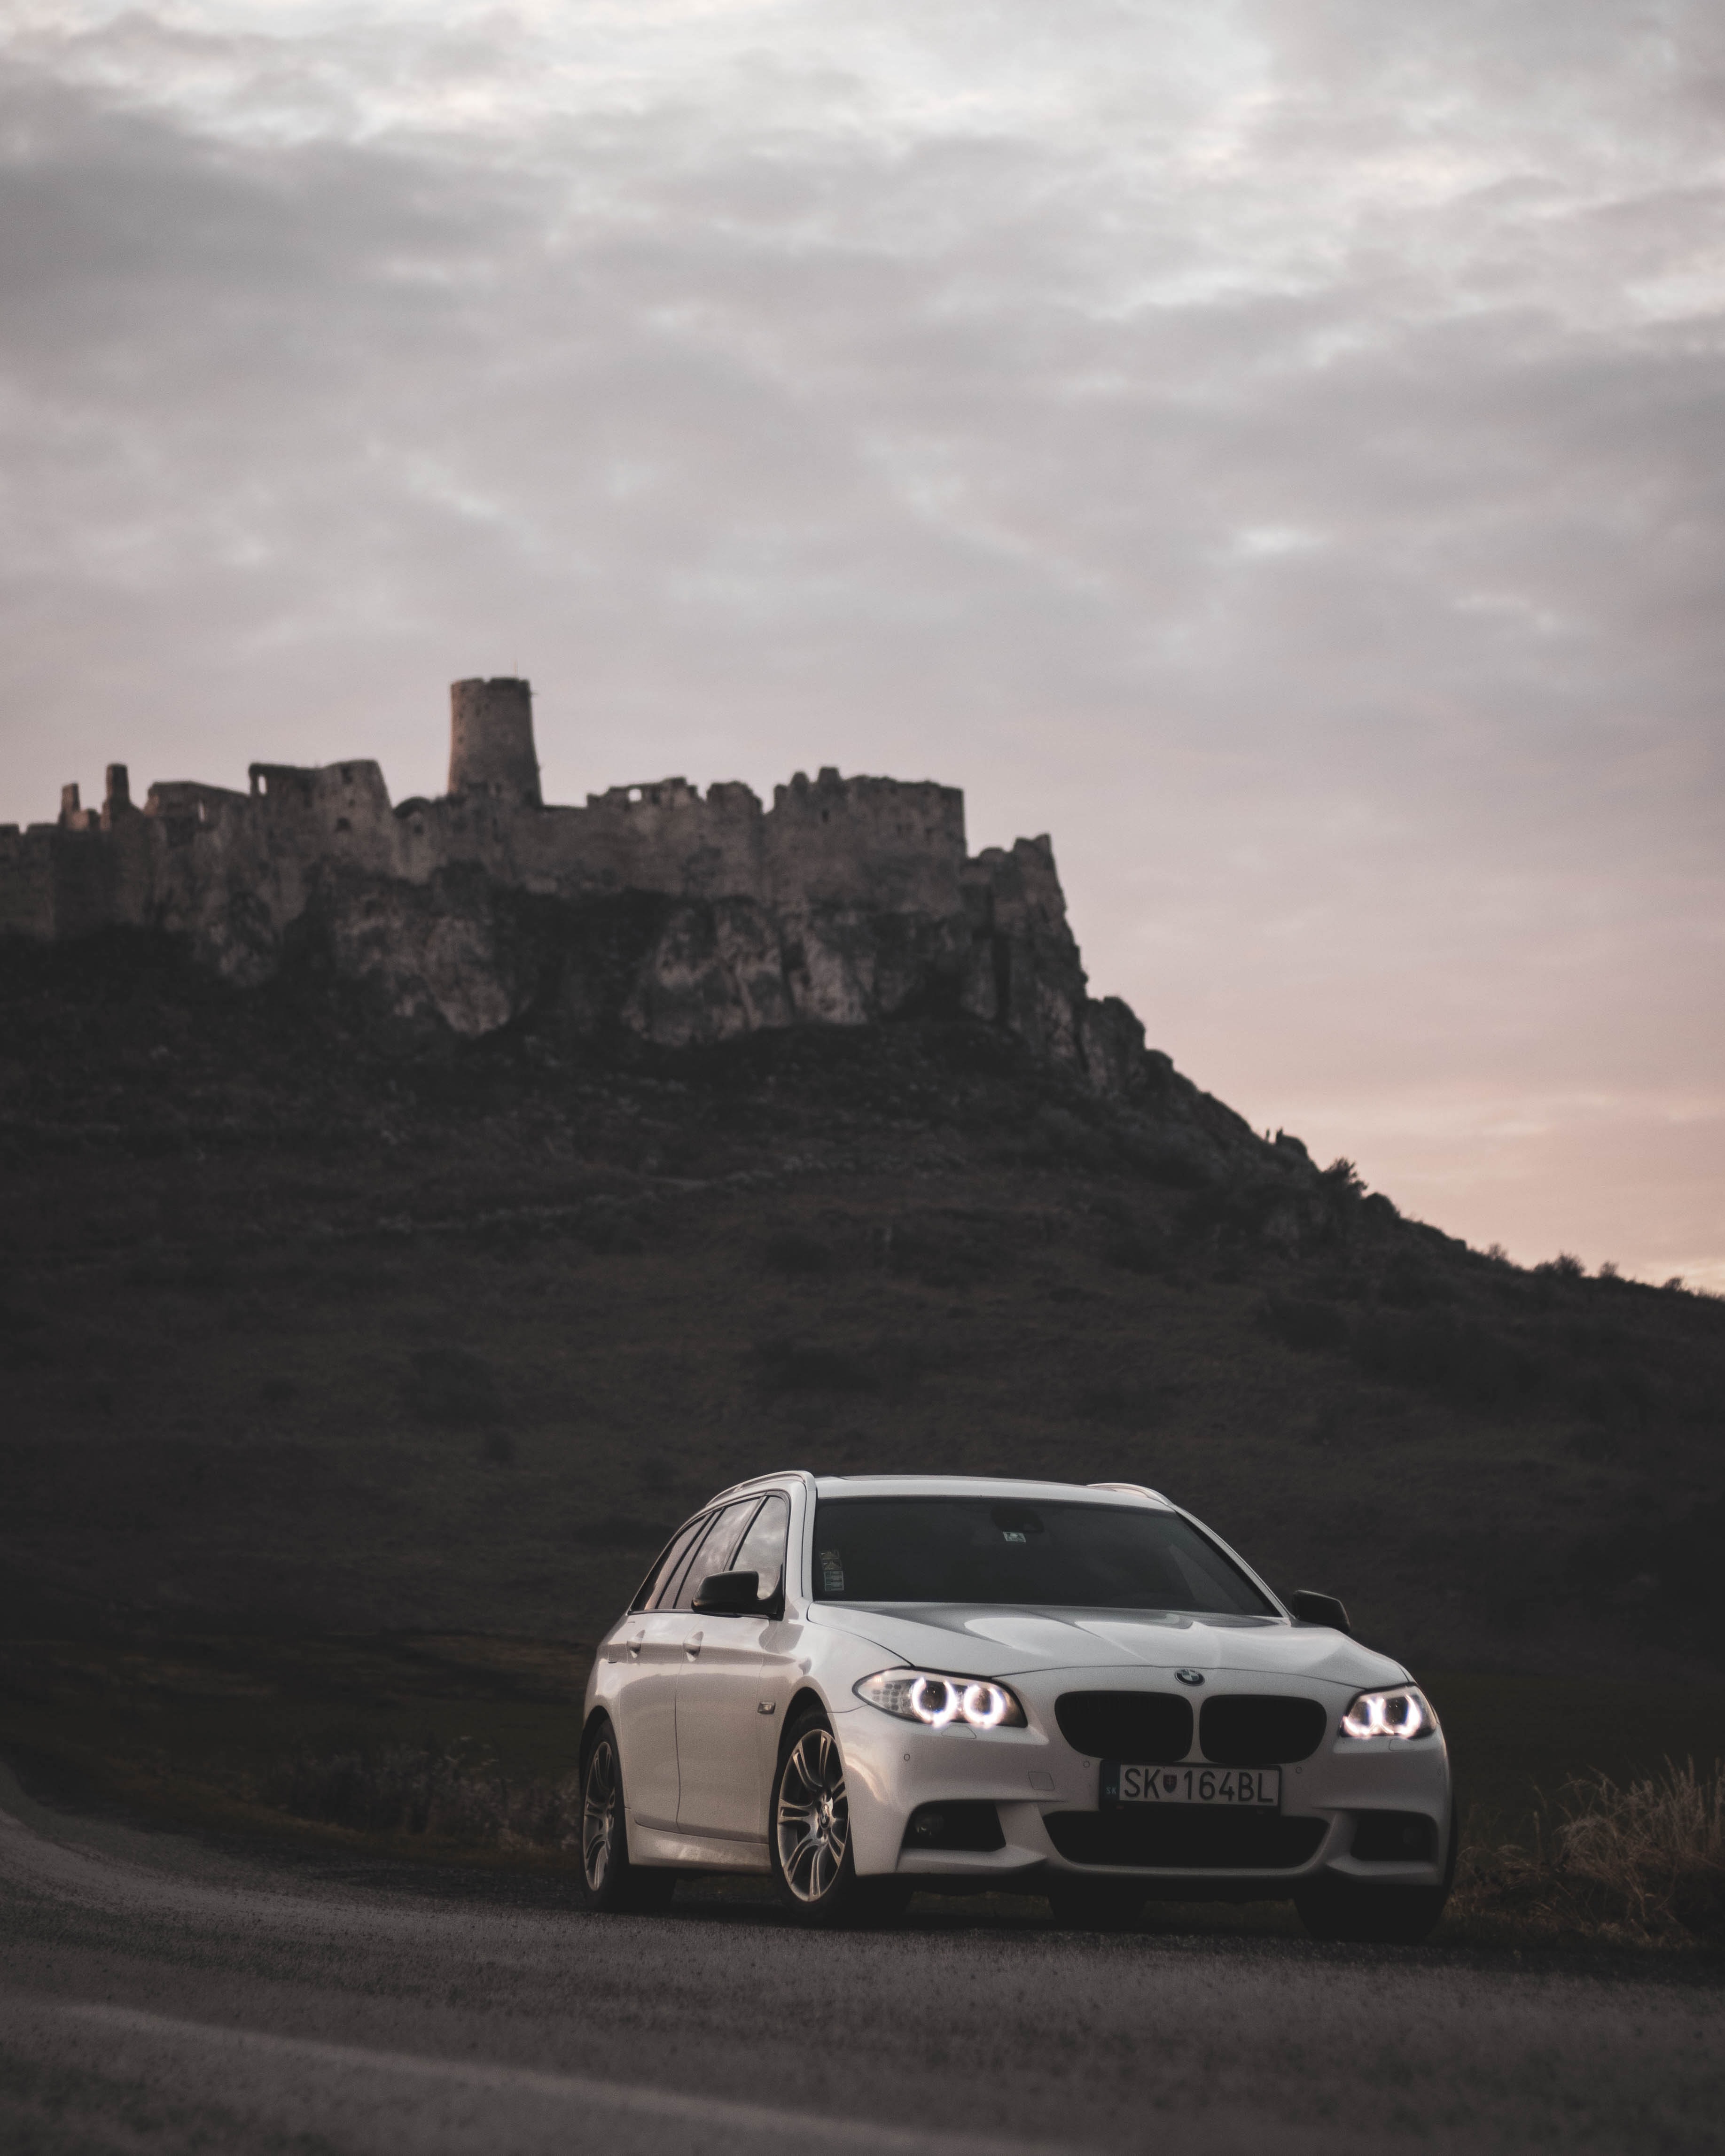 android lock, bmw, cars, white, road, car, ruin, ruins